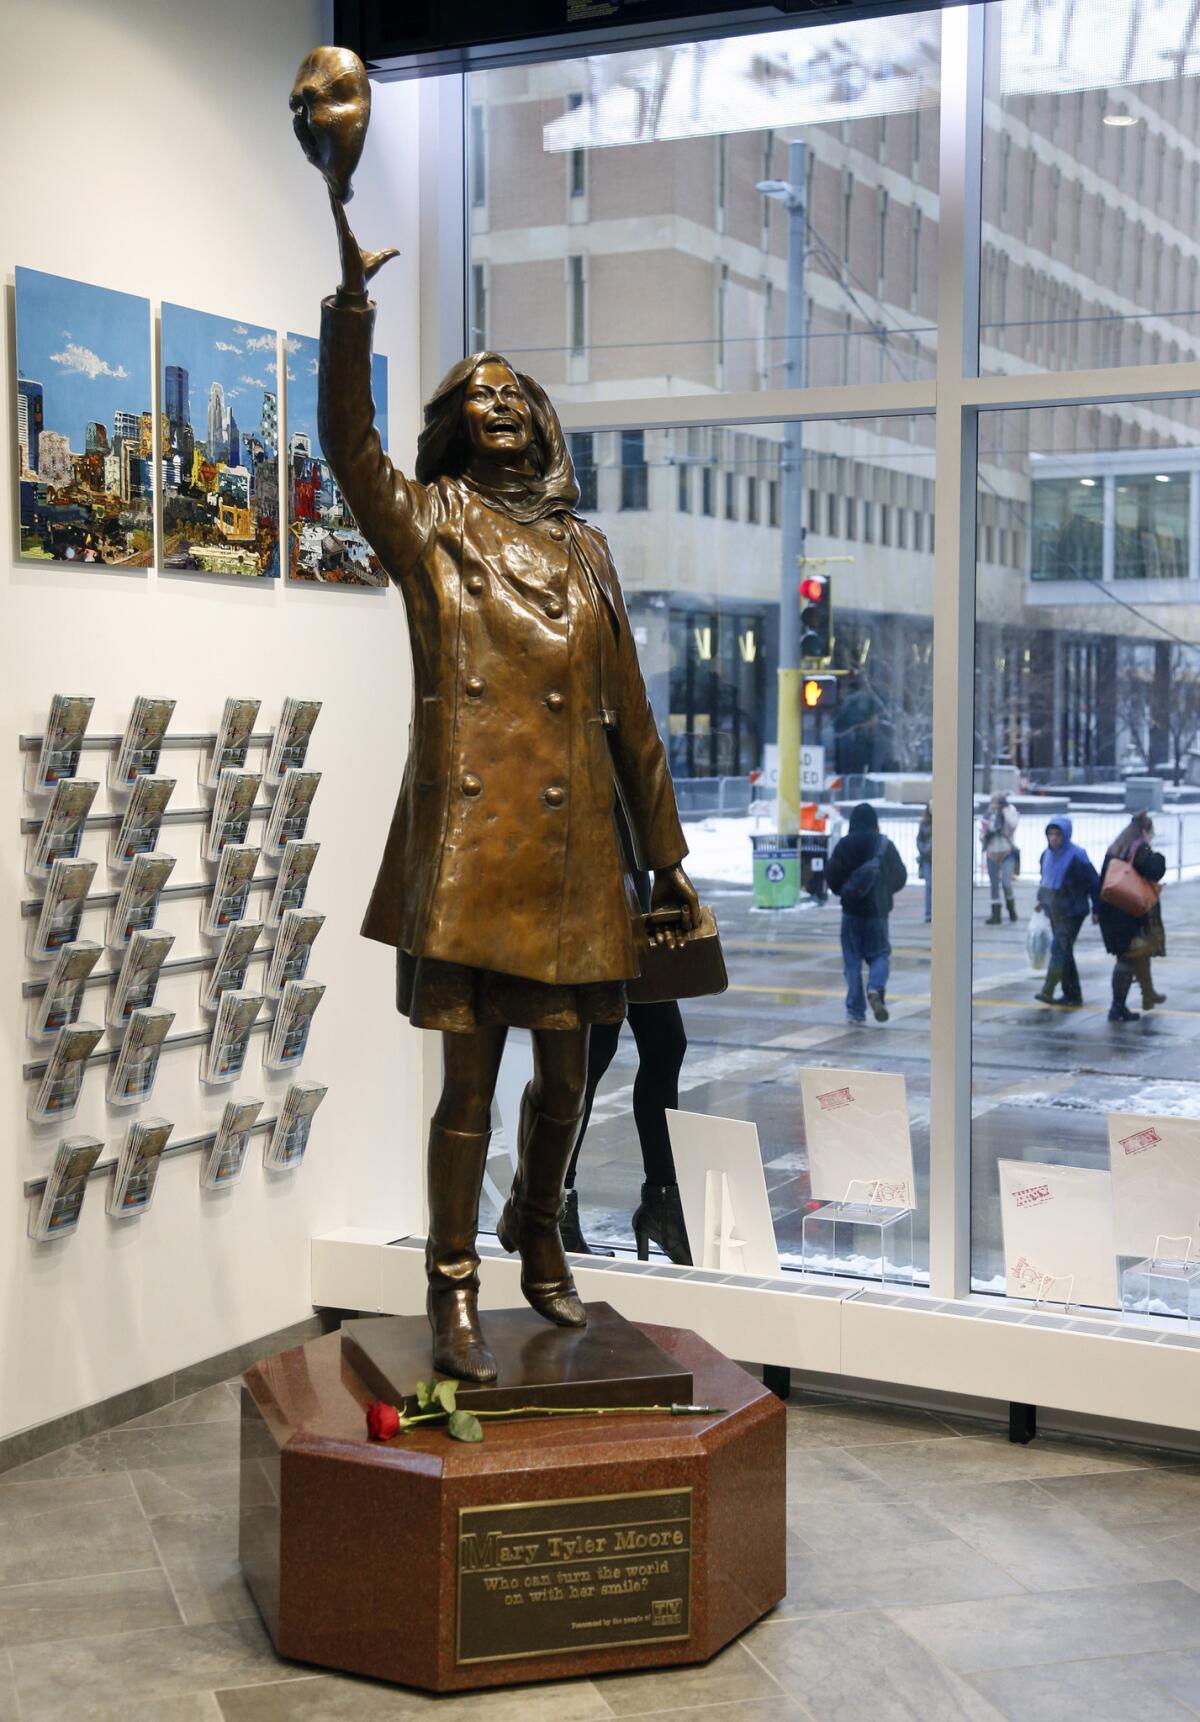 A single rose sits by the life-size bronze statue of Mary Tyler Moore at the Minneapolis Visitor Center, on Wednesday.